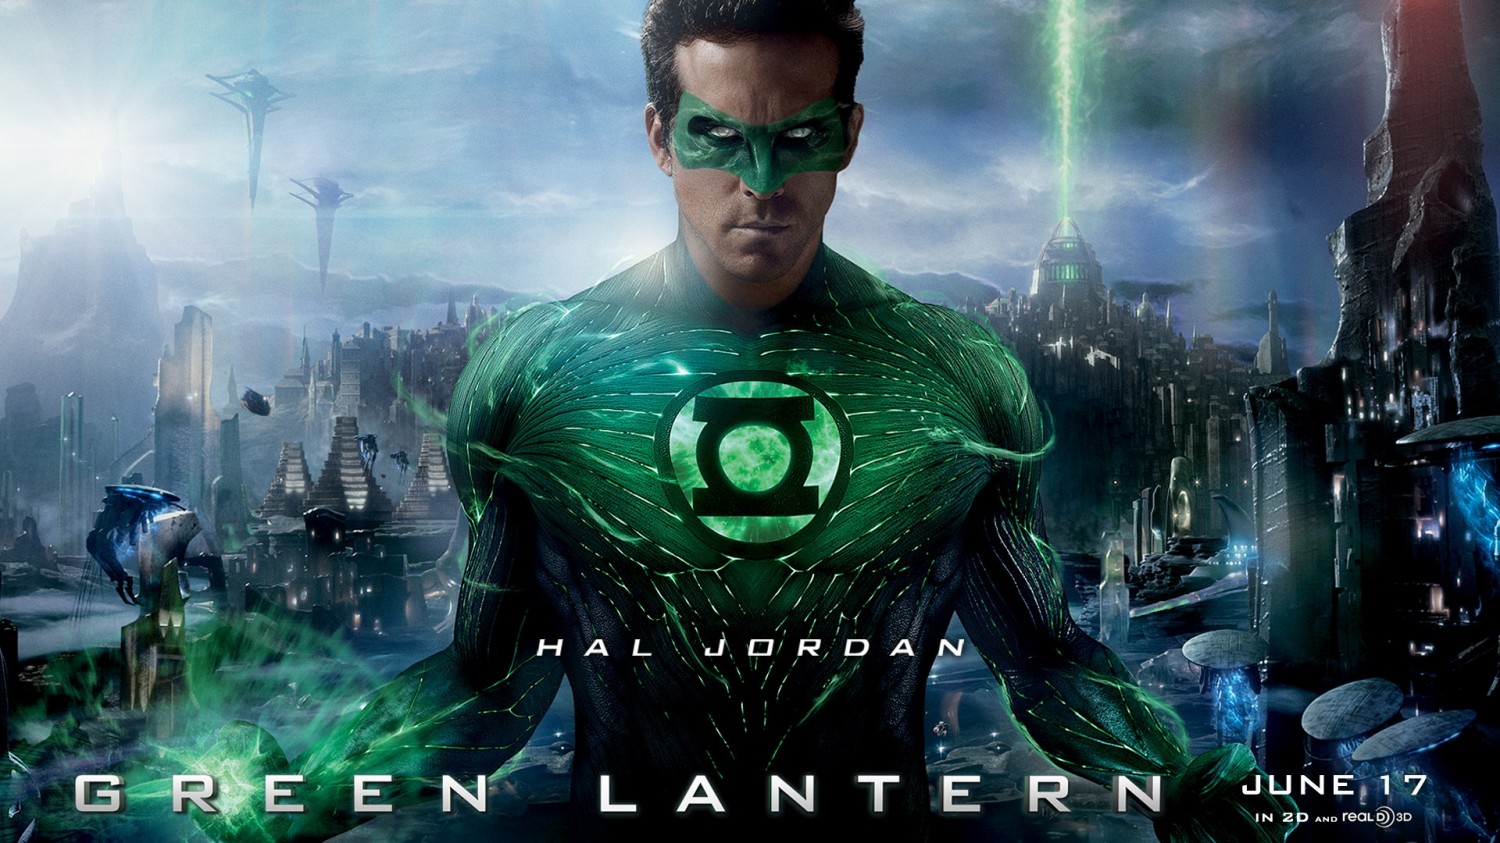 Extra Large Movie Poster Image for Green Lantern (#9 of 20)